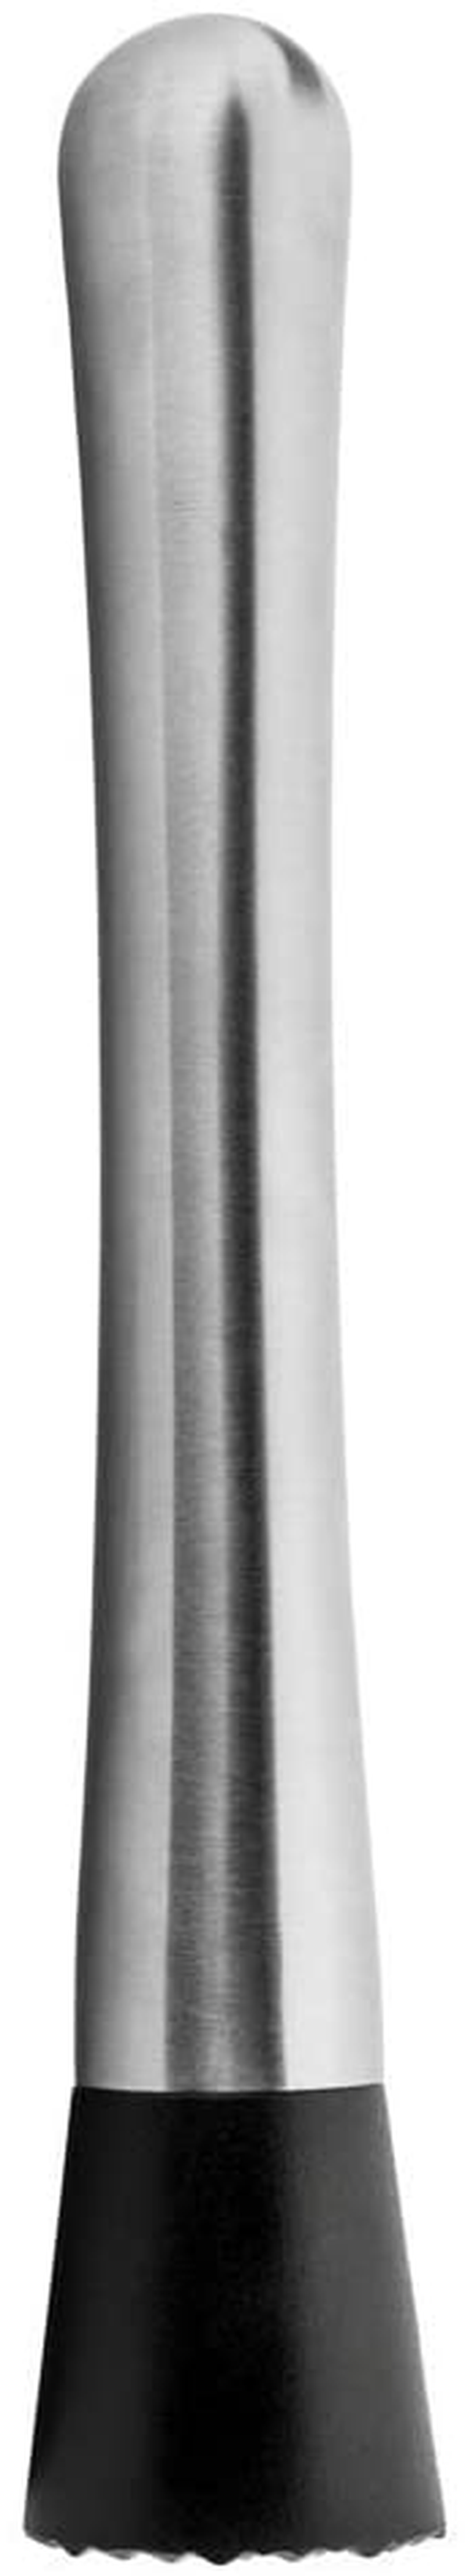 8" Long Stainless Steel Cocktail Muddlers by HQY, Muddler